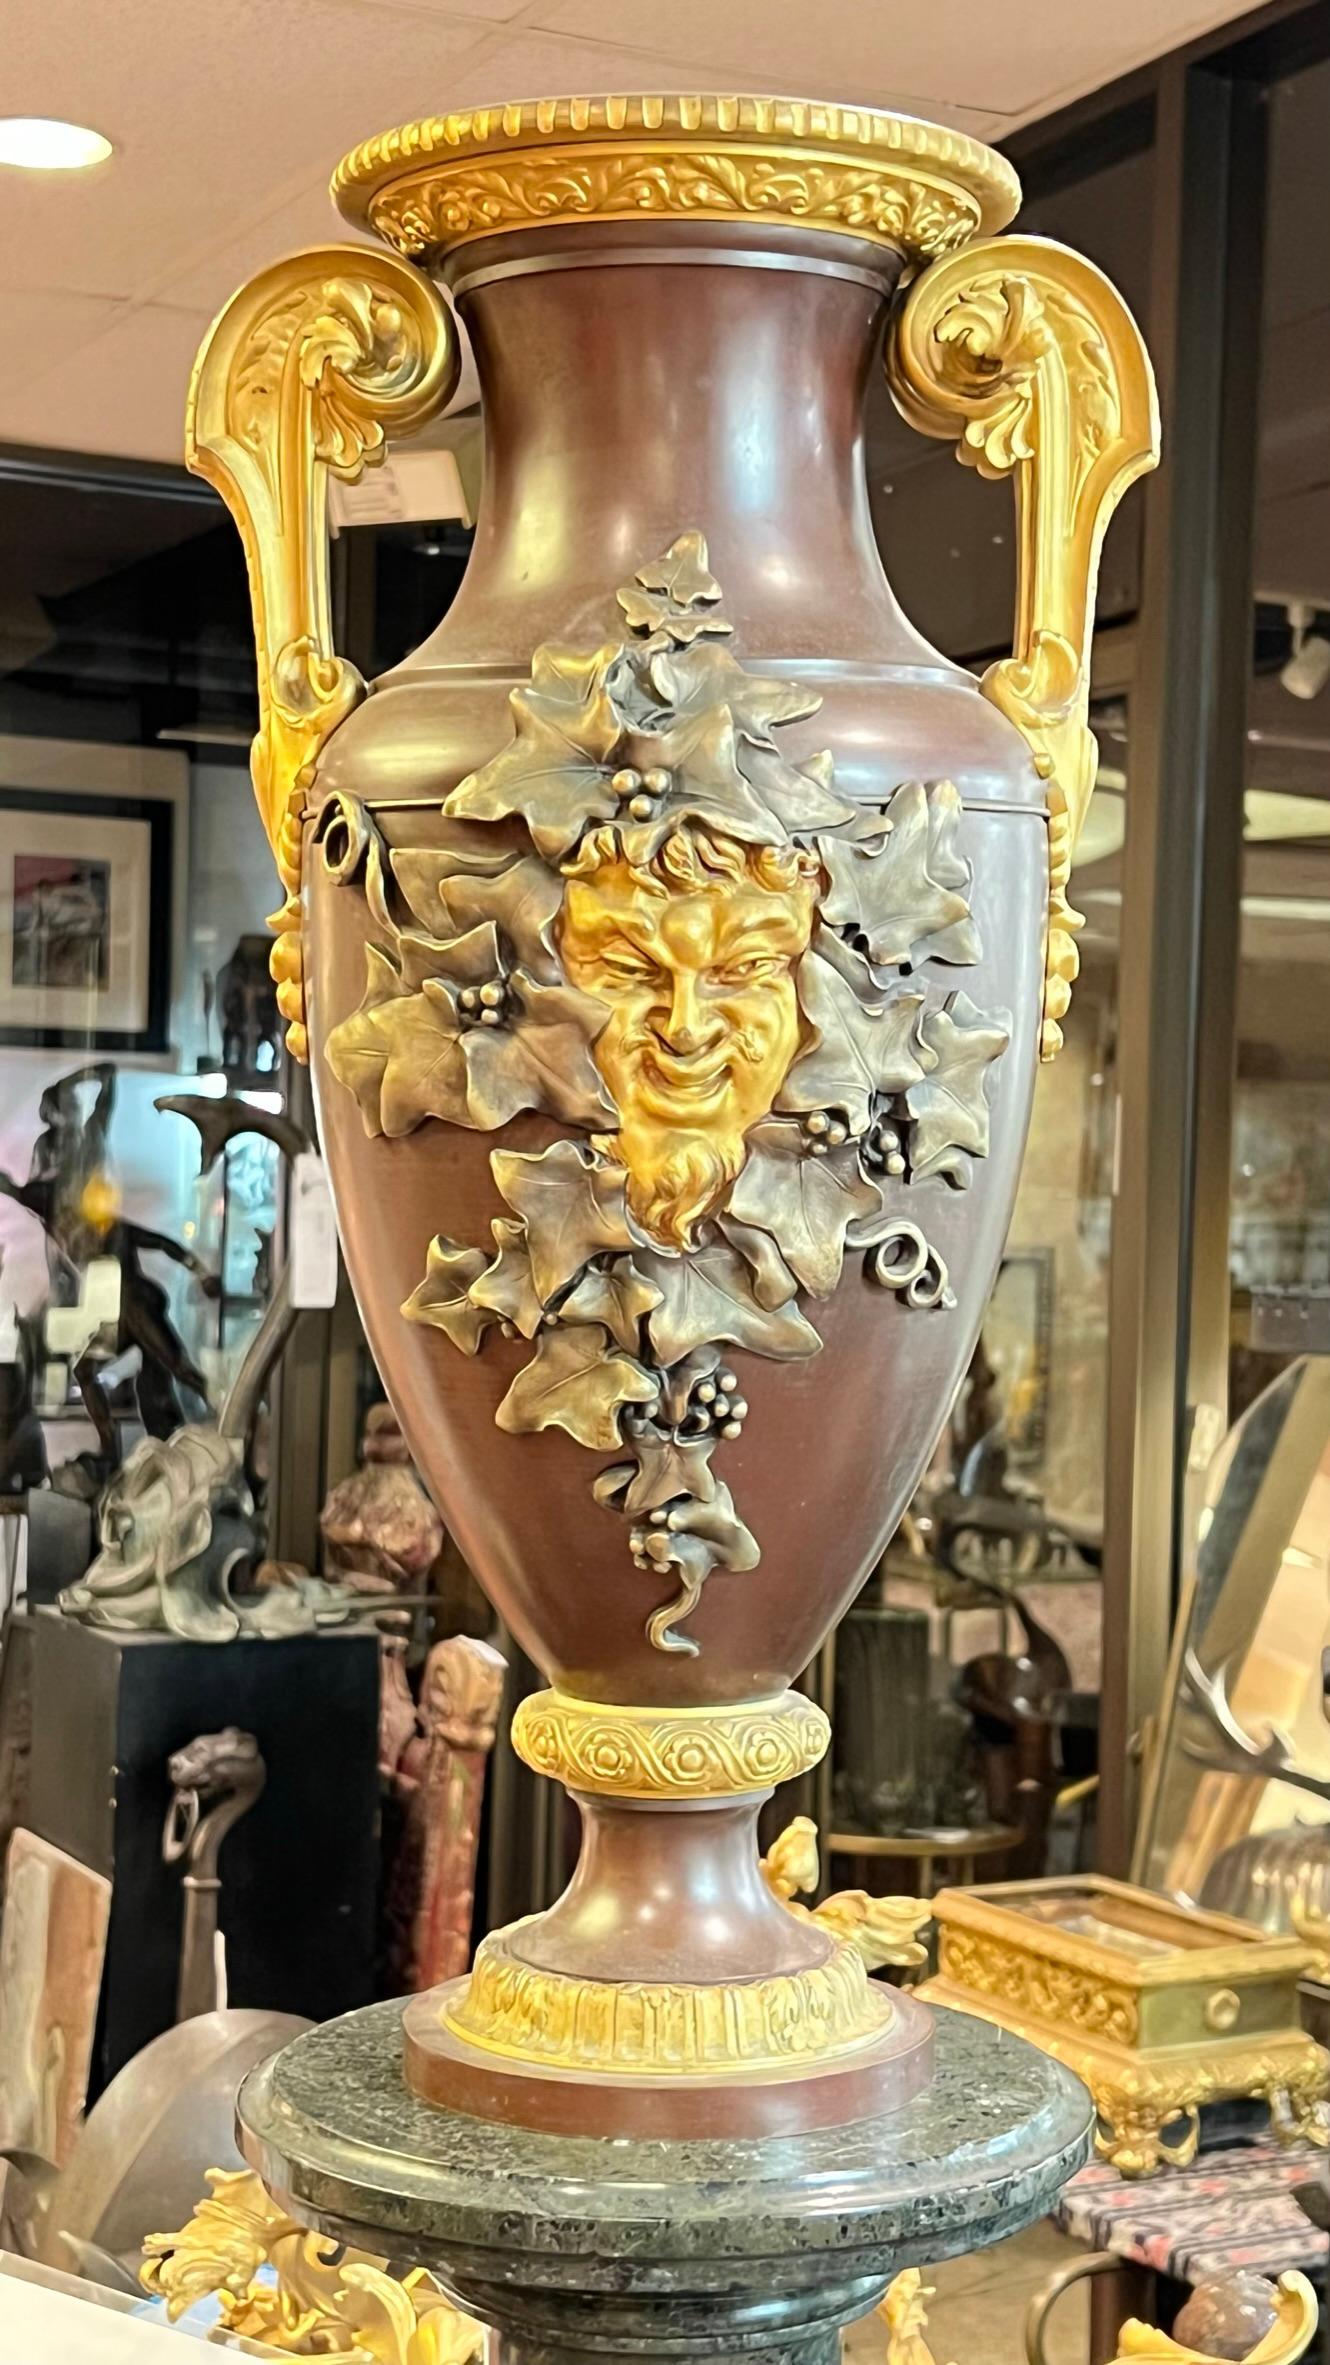 Our centerpiece vase, attributed to Ferdinand Barbedienne, circa 1870s, features an expressive mask of Bacchus surrounded by silvered grapevines, prominent gilt bronze handles with acanthus leaf and bellflower motifs, and gilt bronze mounts at the